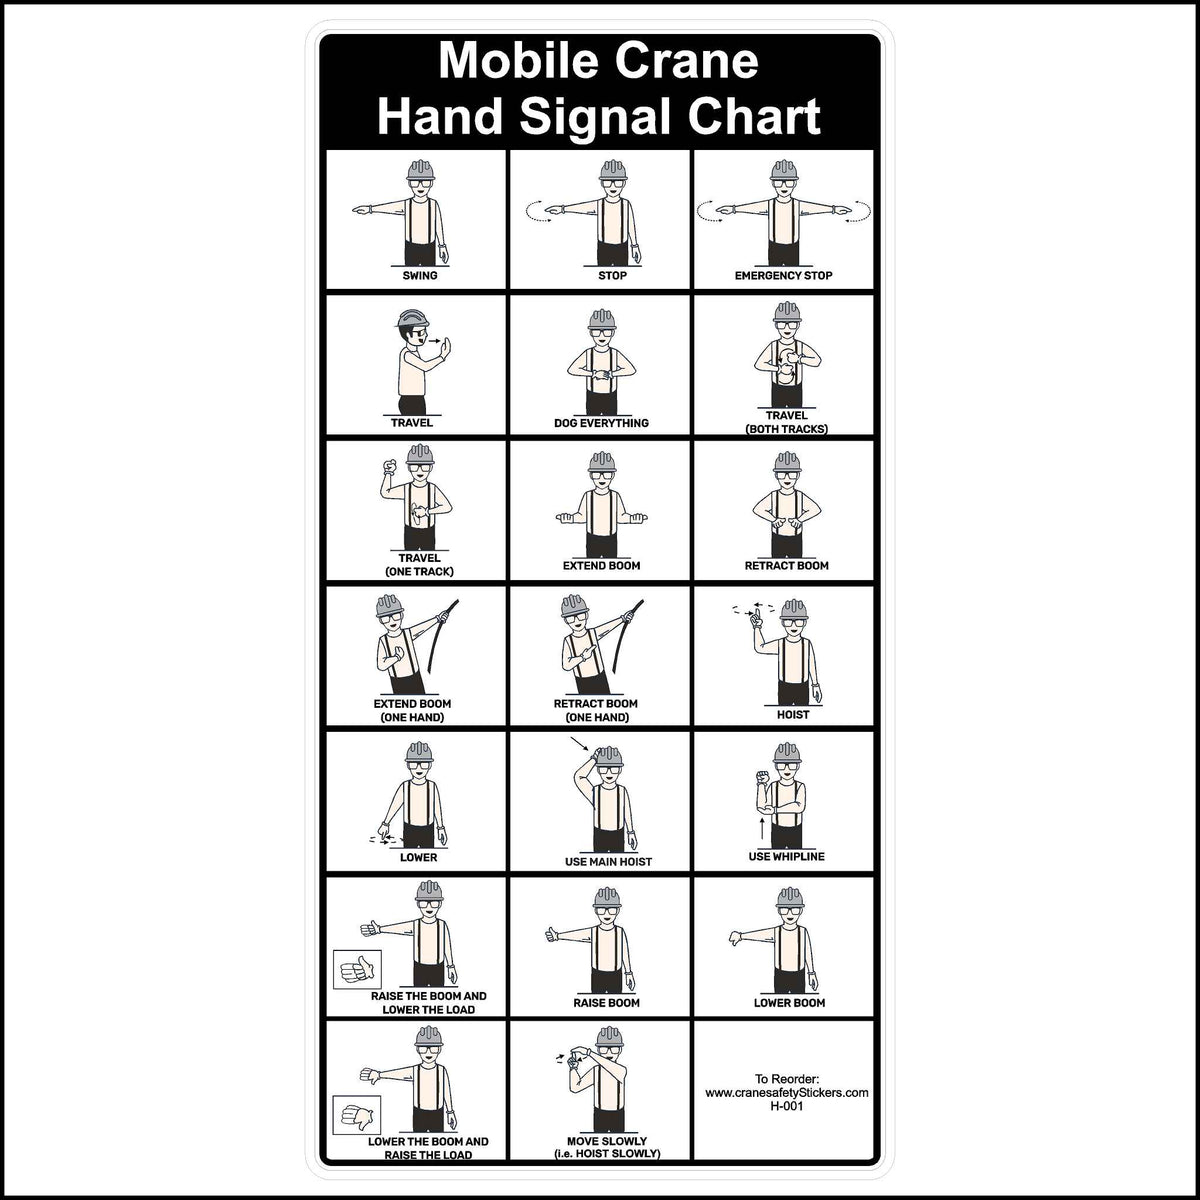 Mobile Crane Hand Signal Chart Printed with all the hand signals for a mobile crane. 6 inches by 12 inches in size.